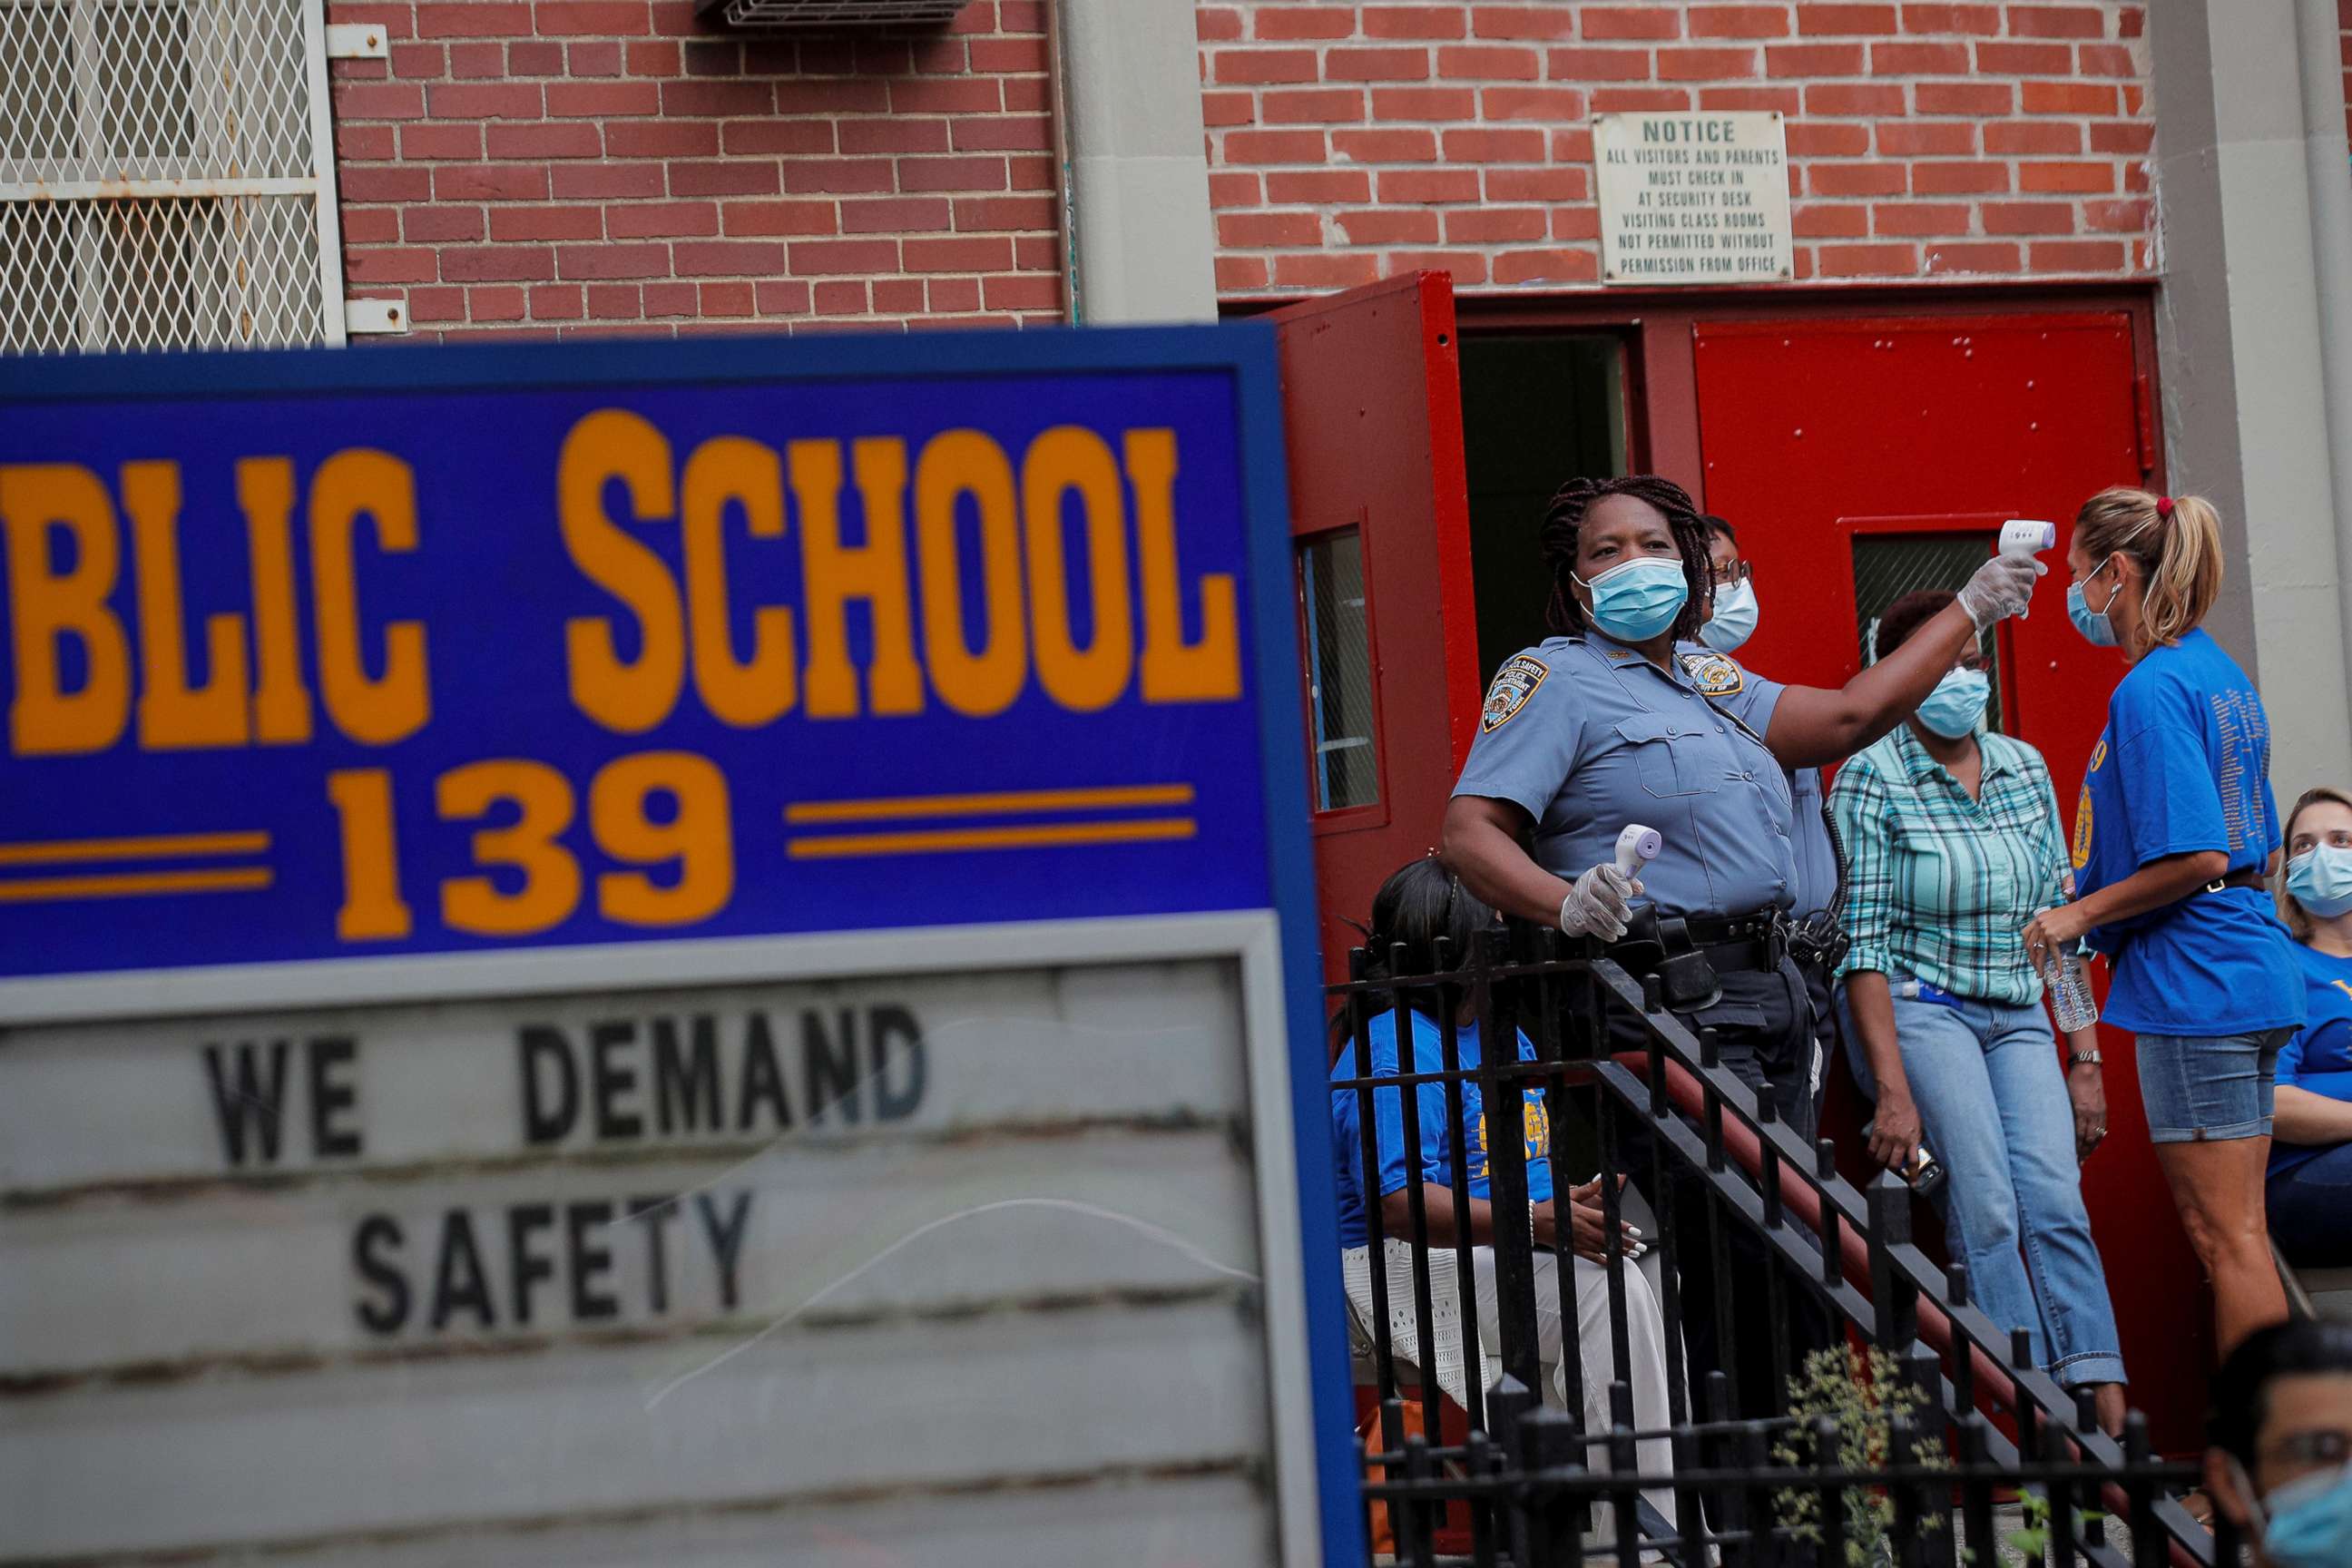 PHOTO: School Safety Officers check a teacher's temperature for safety reasons outside a school building, as preparations begin for the delayed start of the school year in Brooklyn, New York, Sept. 14, 2020.